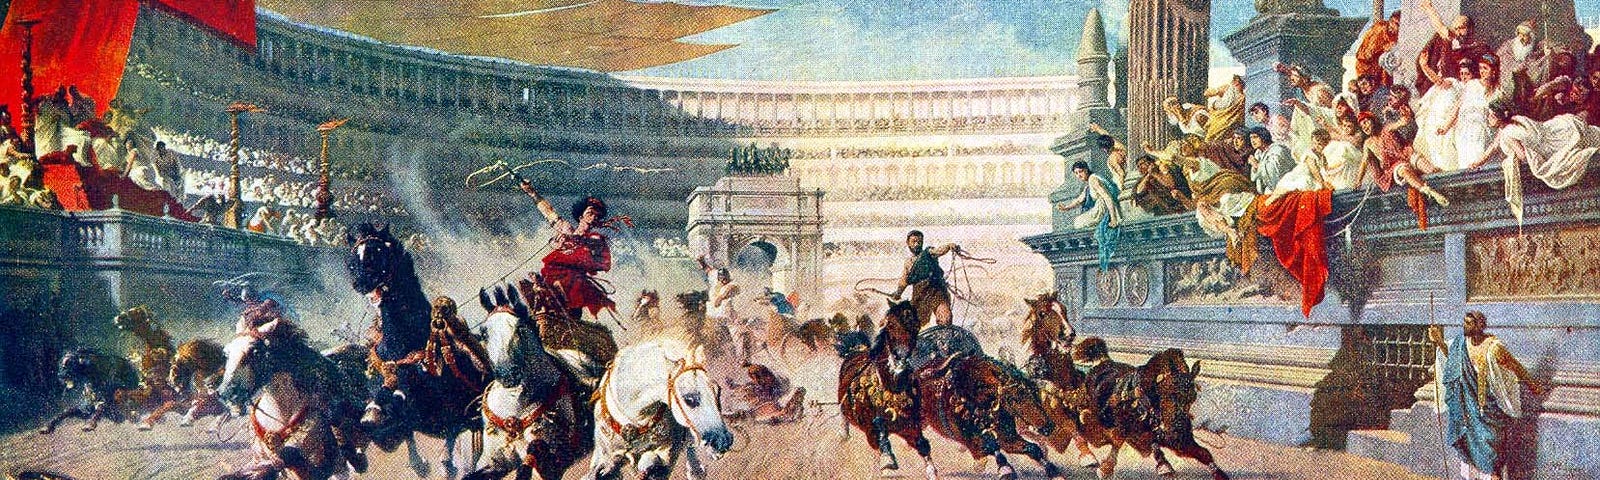 the last byzantine chariot races